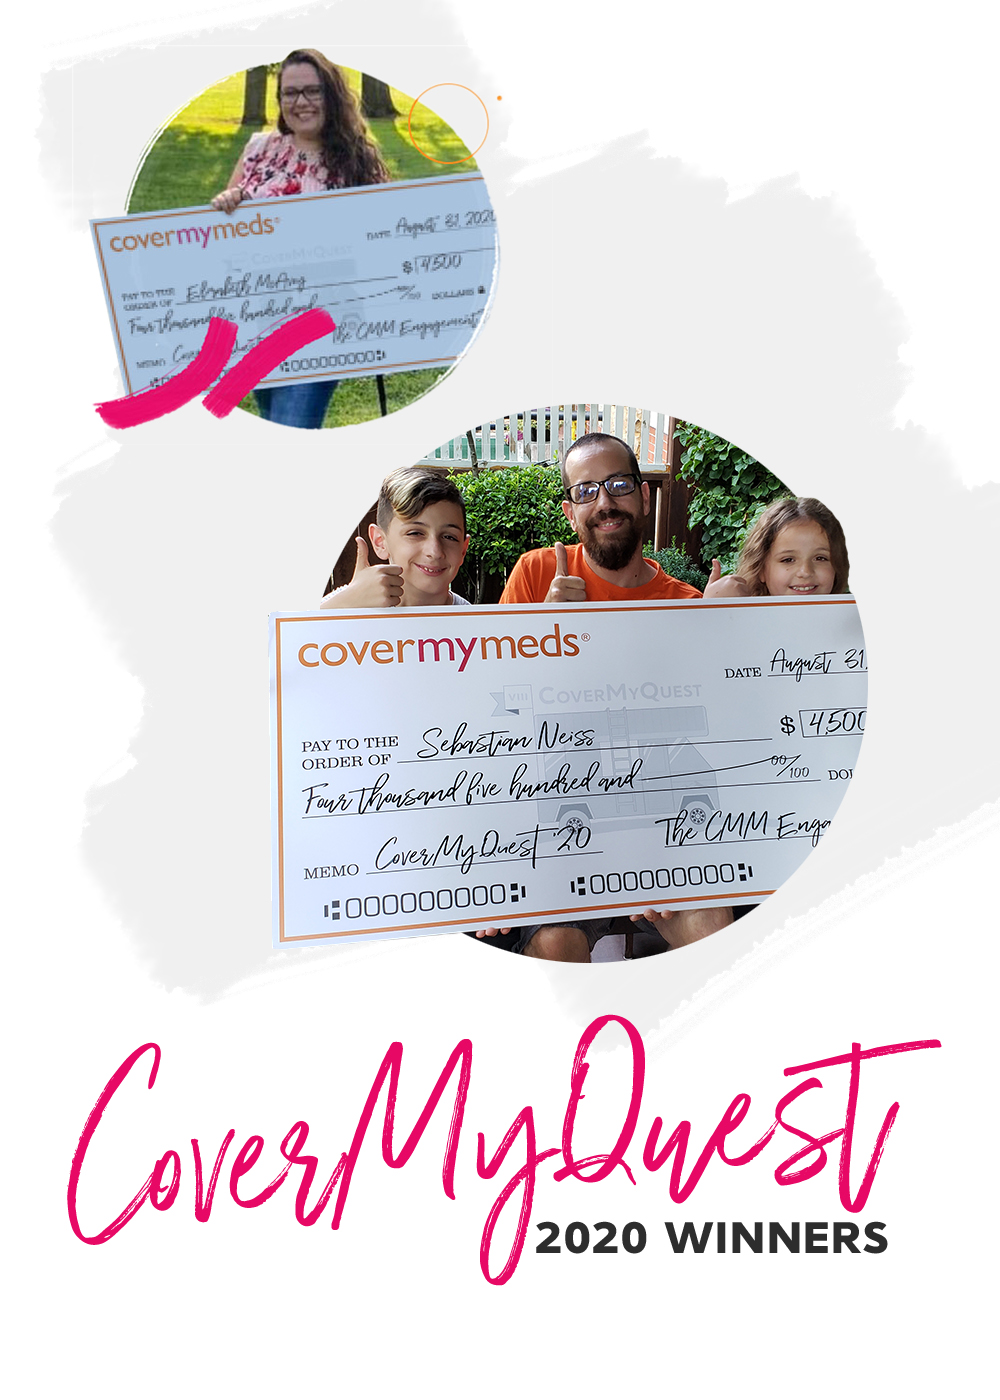 CoverMyMeds' CoverMyQuest 2020 winners update